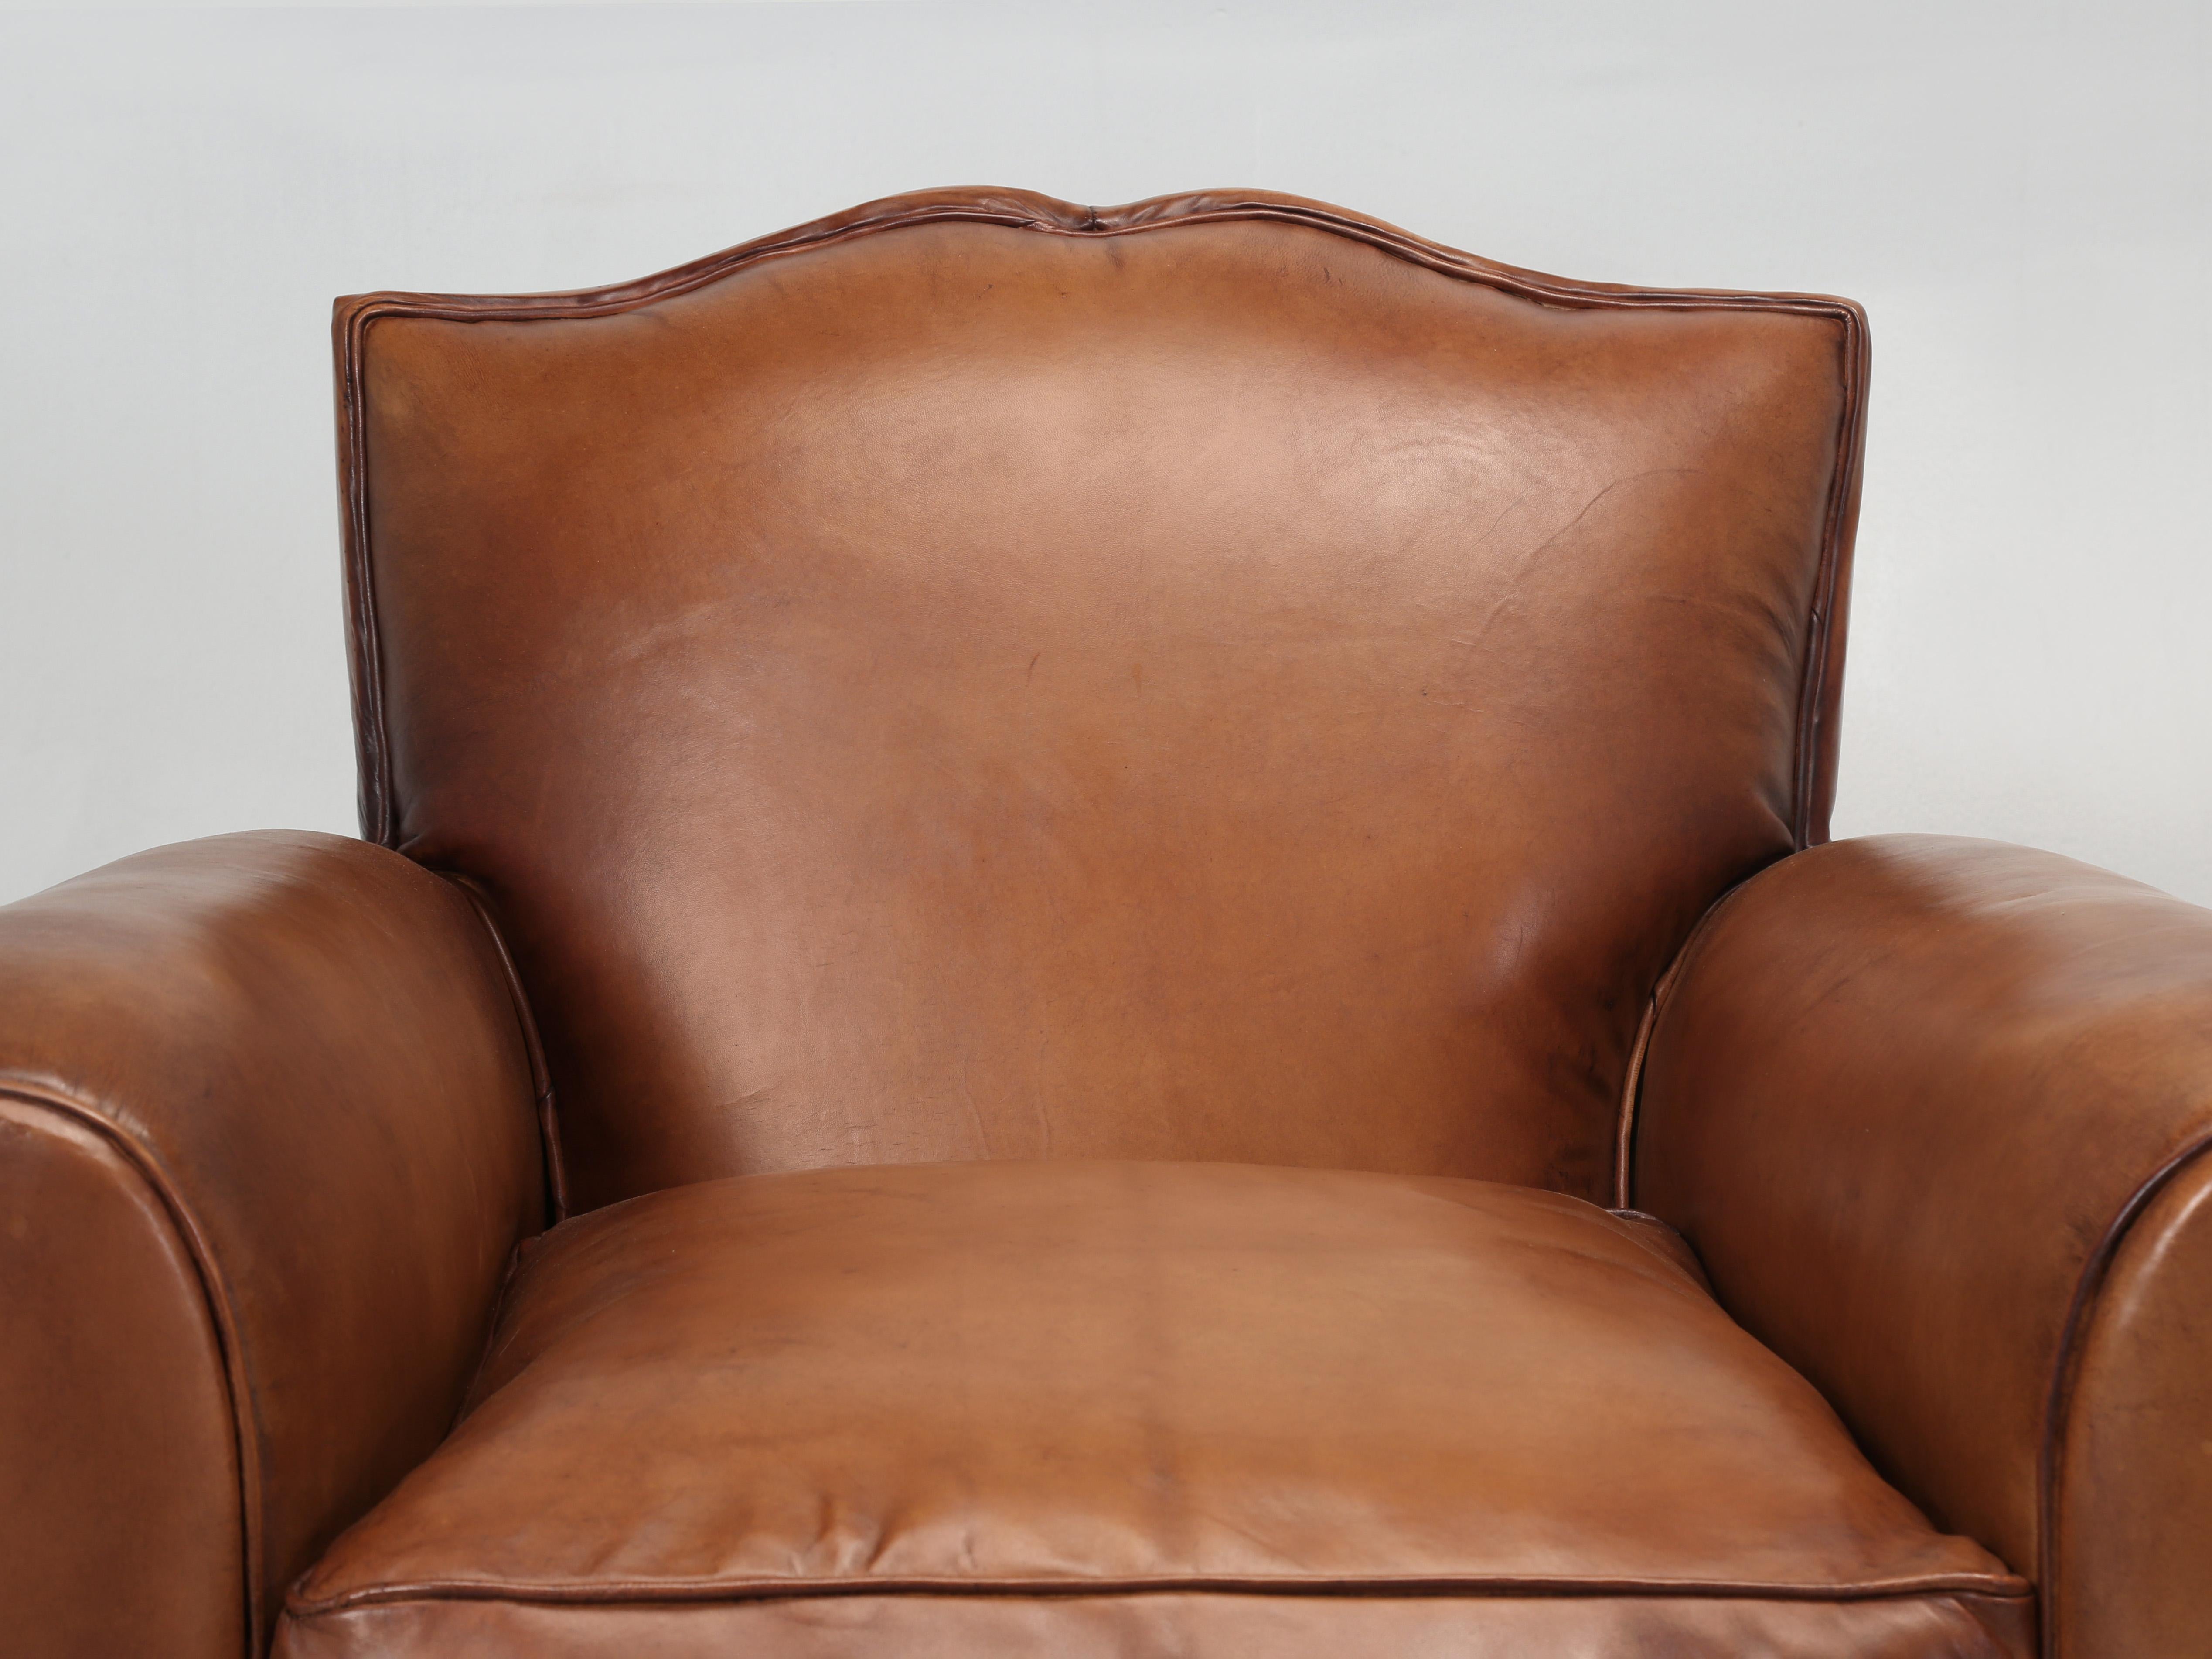 Pair French Leather Club Chairs Restored in France with New Leather. Now, normally this is where I would be telling you how our Old Plank Upholstery department completely disassembled the Club Chairs and rebuilt them from the frame up and tried to